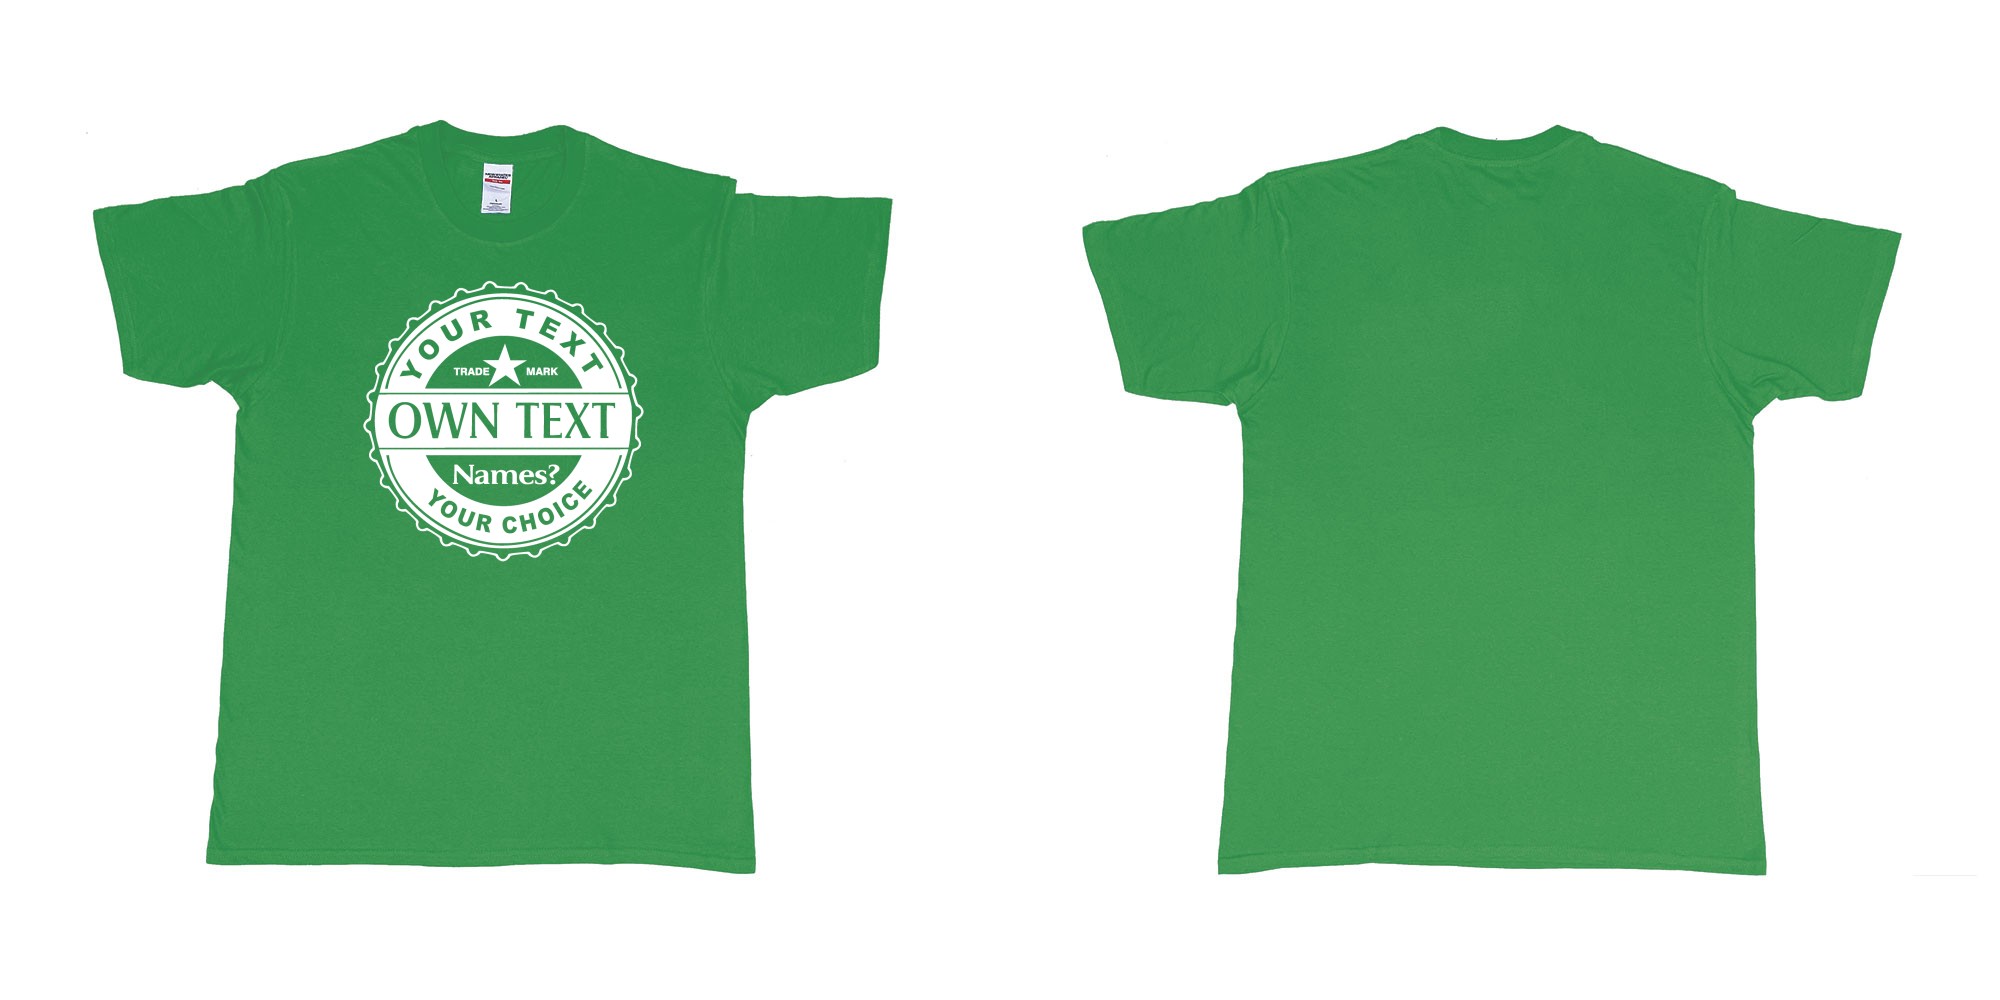 Custom tshirt design bintang classic strait one color in fabric color irish-green choice your own text made in Bali by The Pirate Way